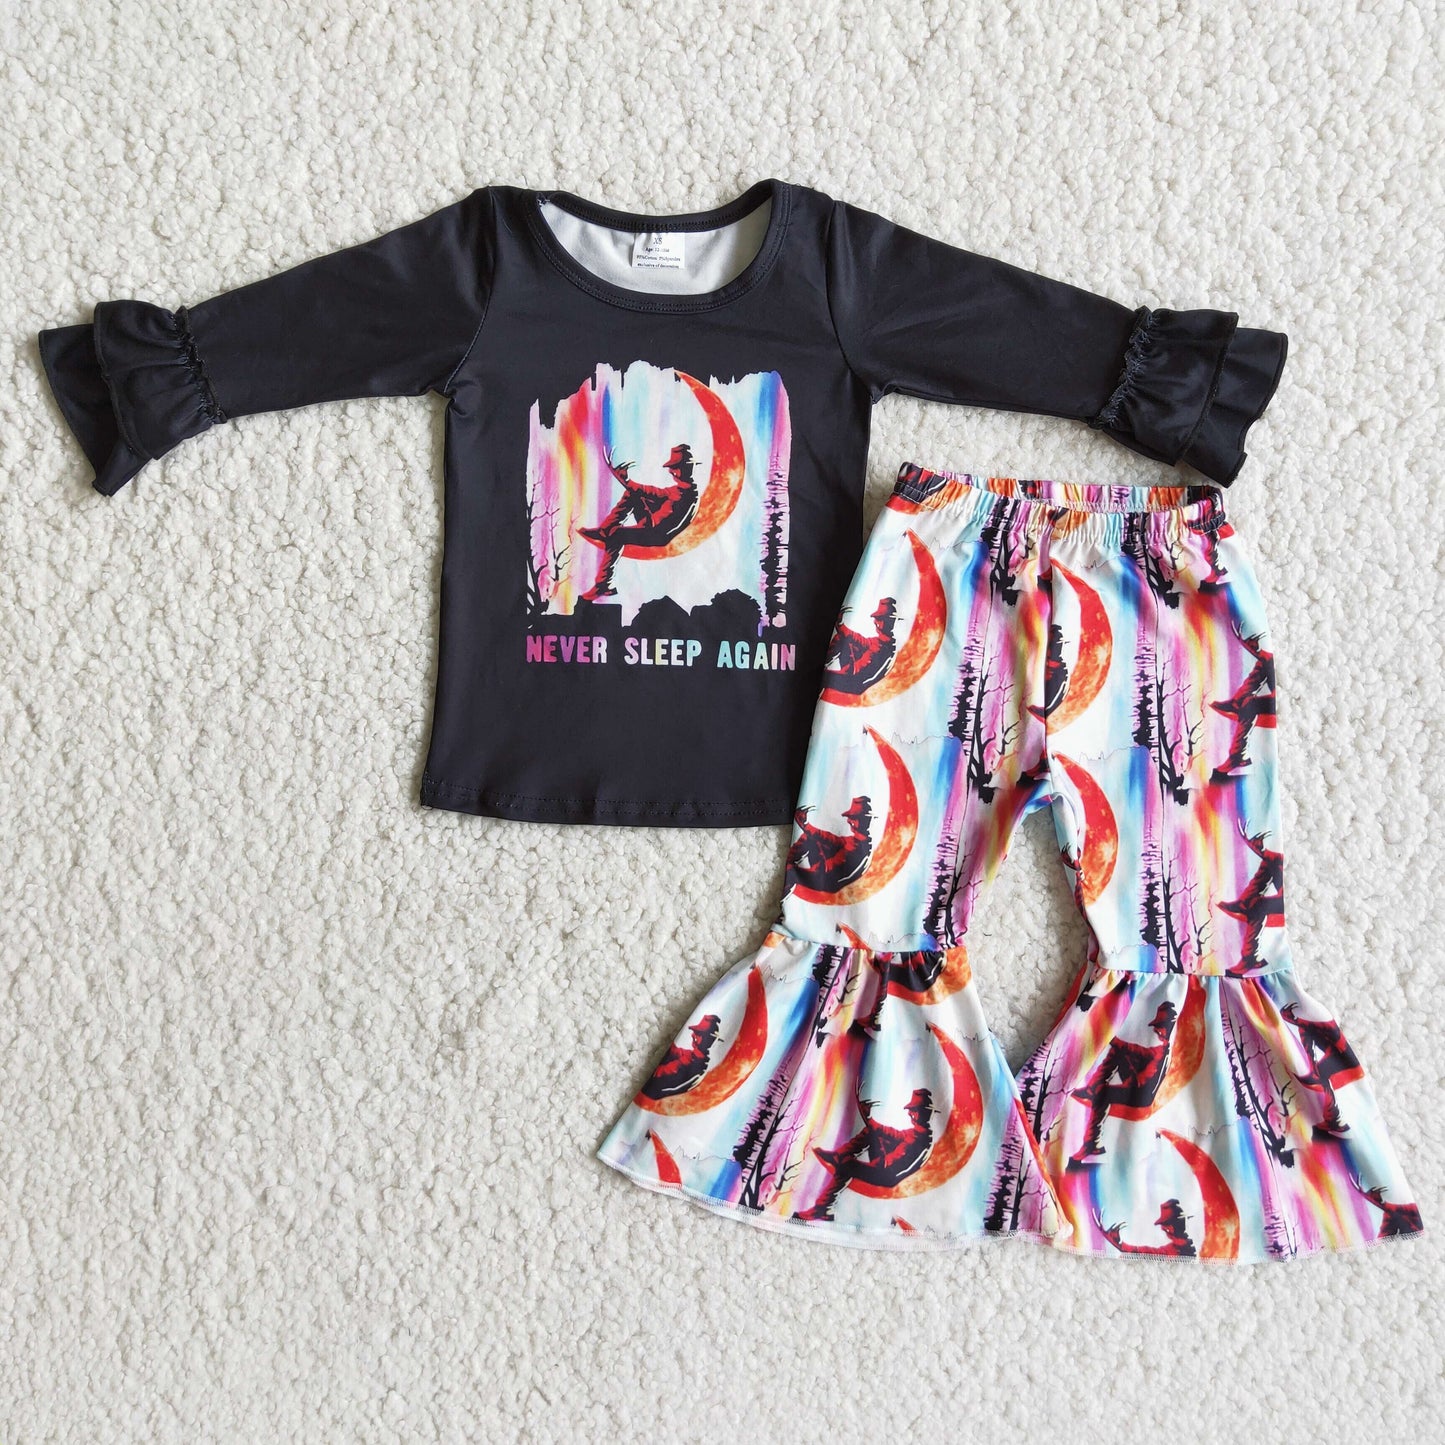 (Promotion) 6 B1-23 Never Sleep Again Print Girls Outfits